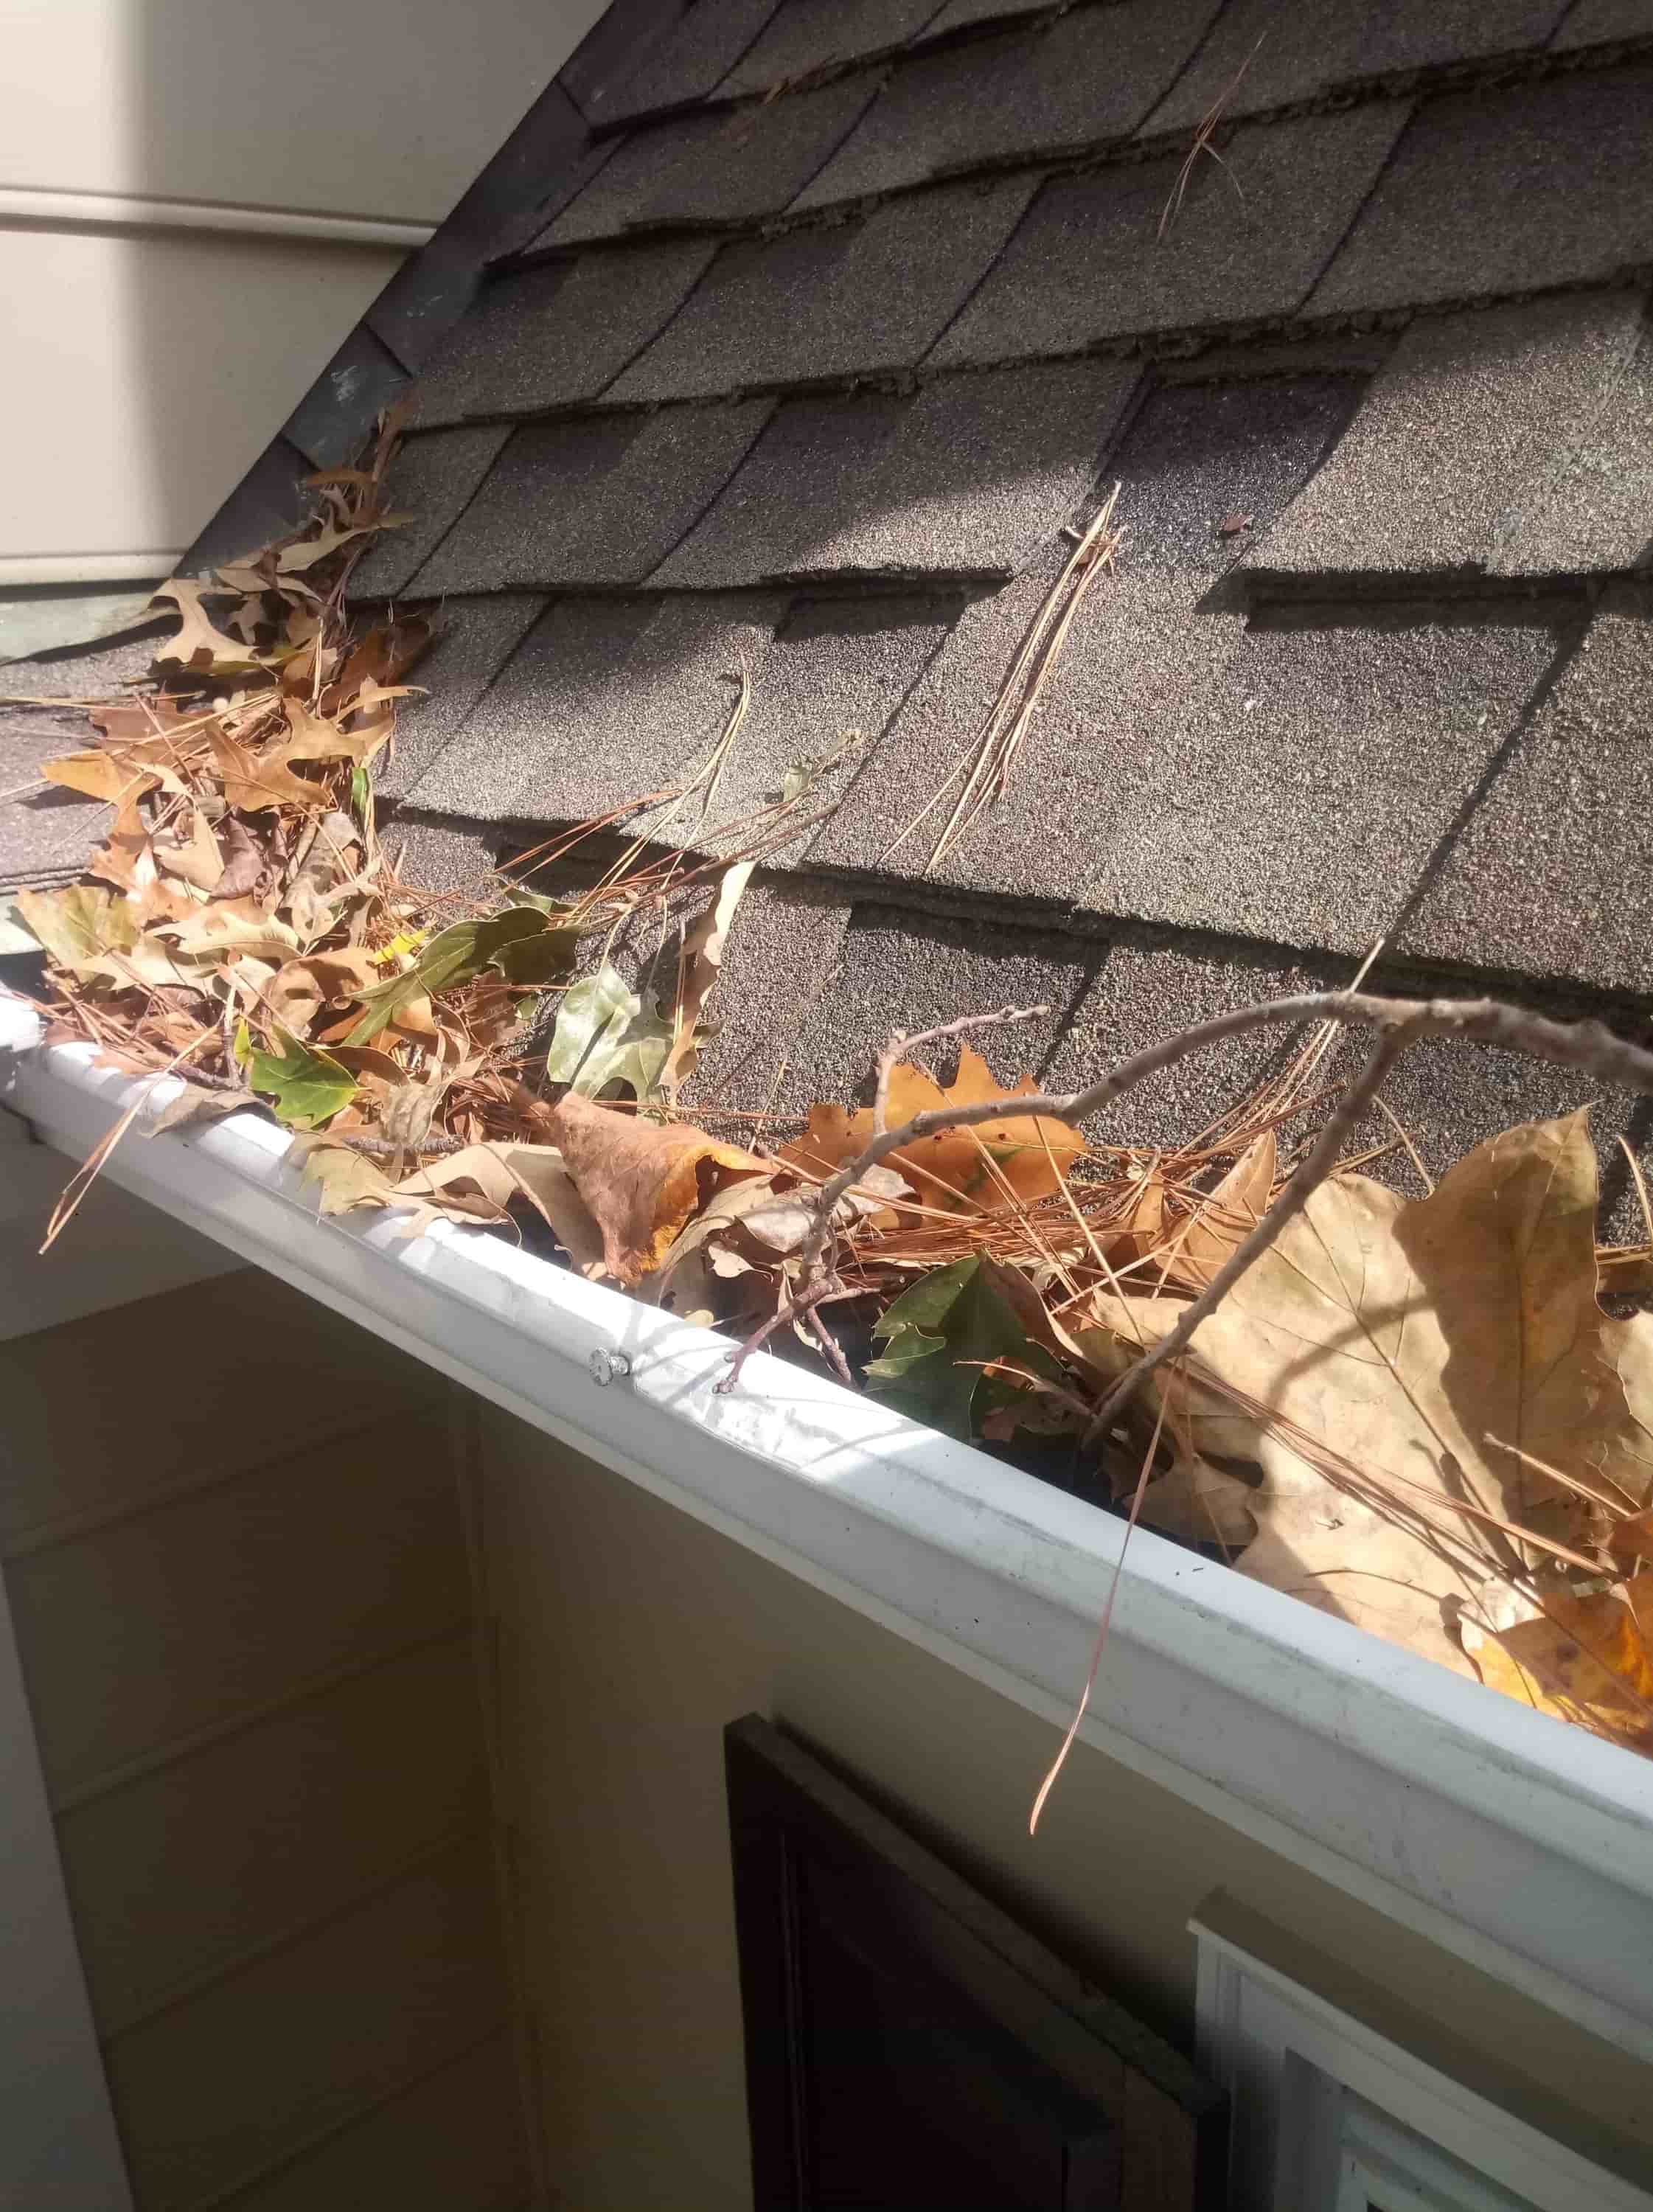 gutter cleaning with pressure washer